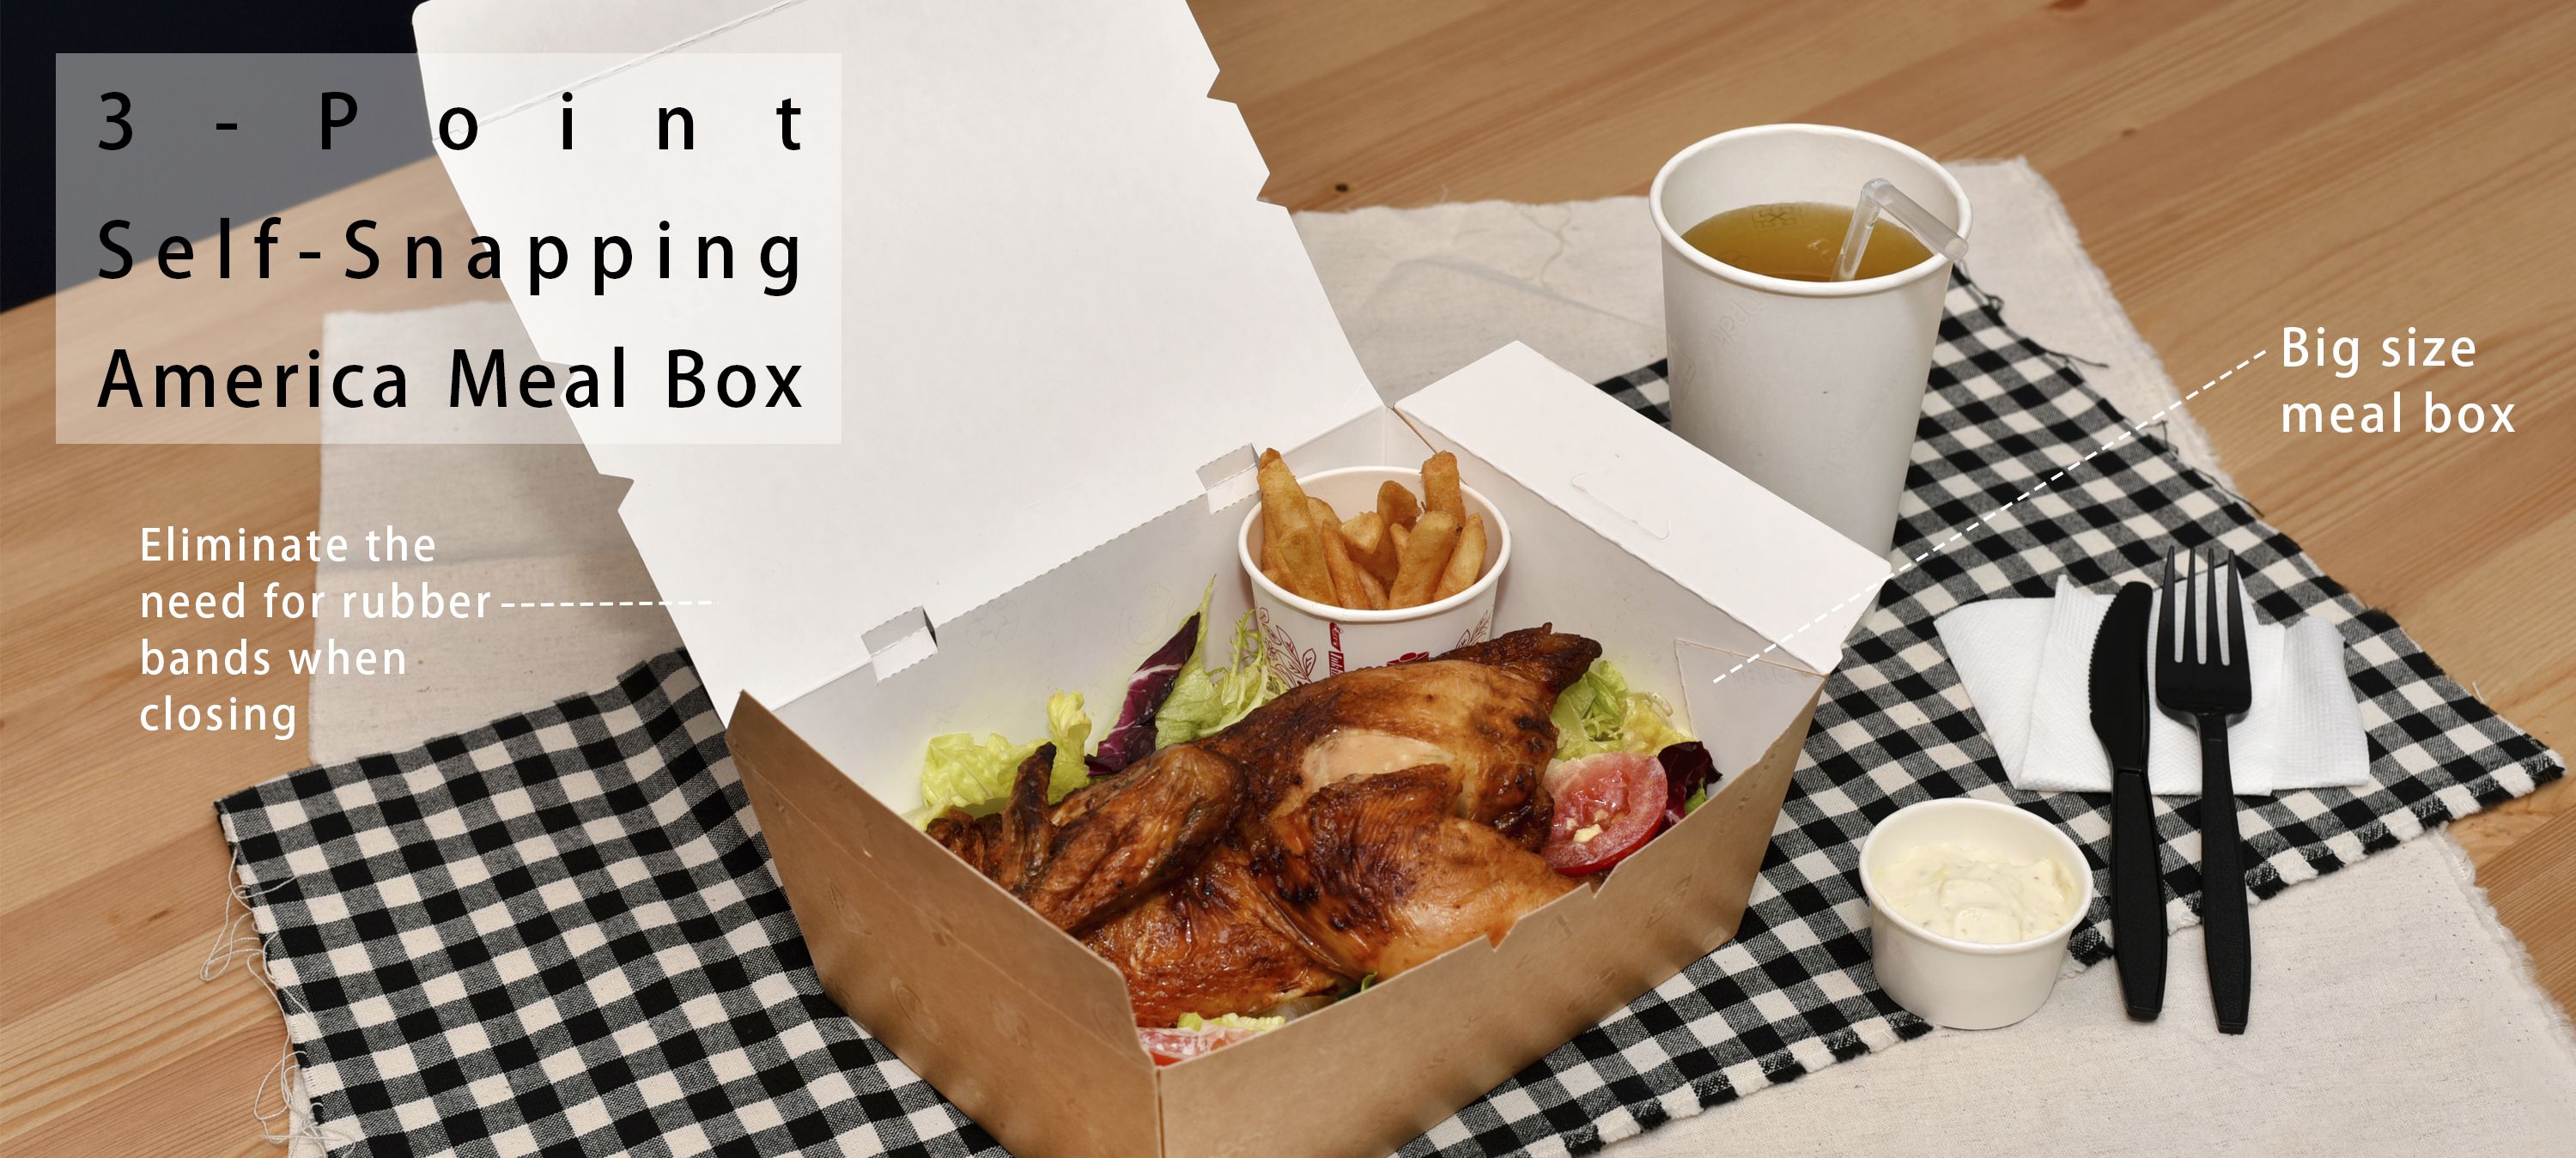 3-Point Self-Snapping America Meal Box